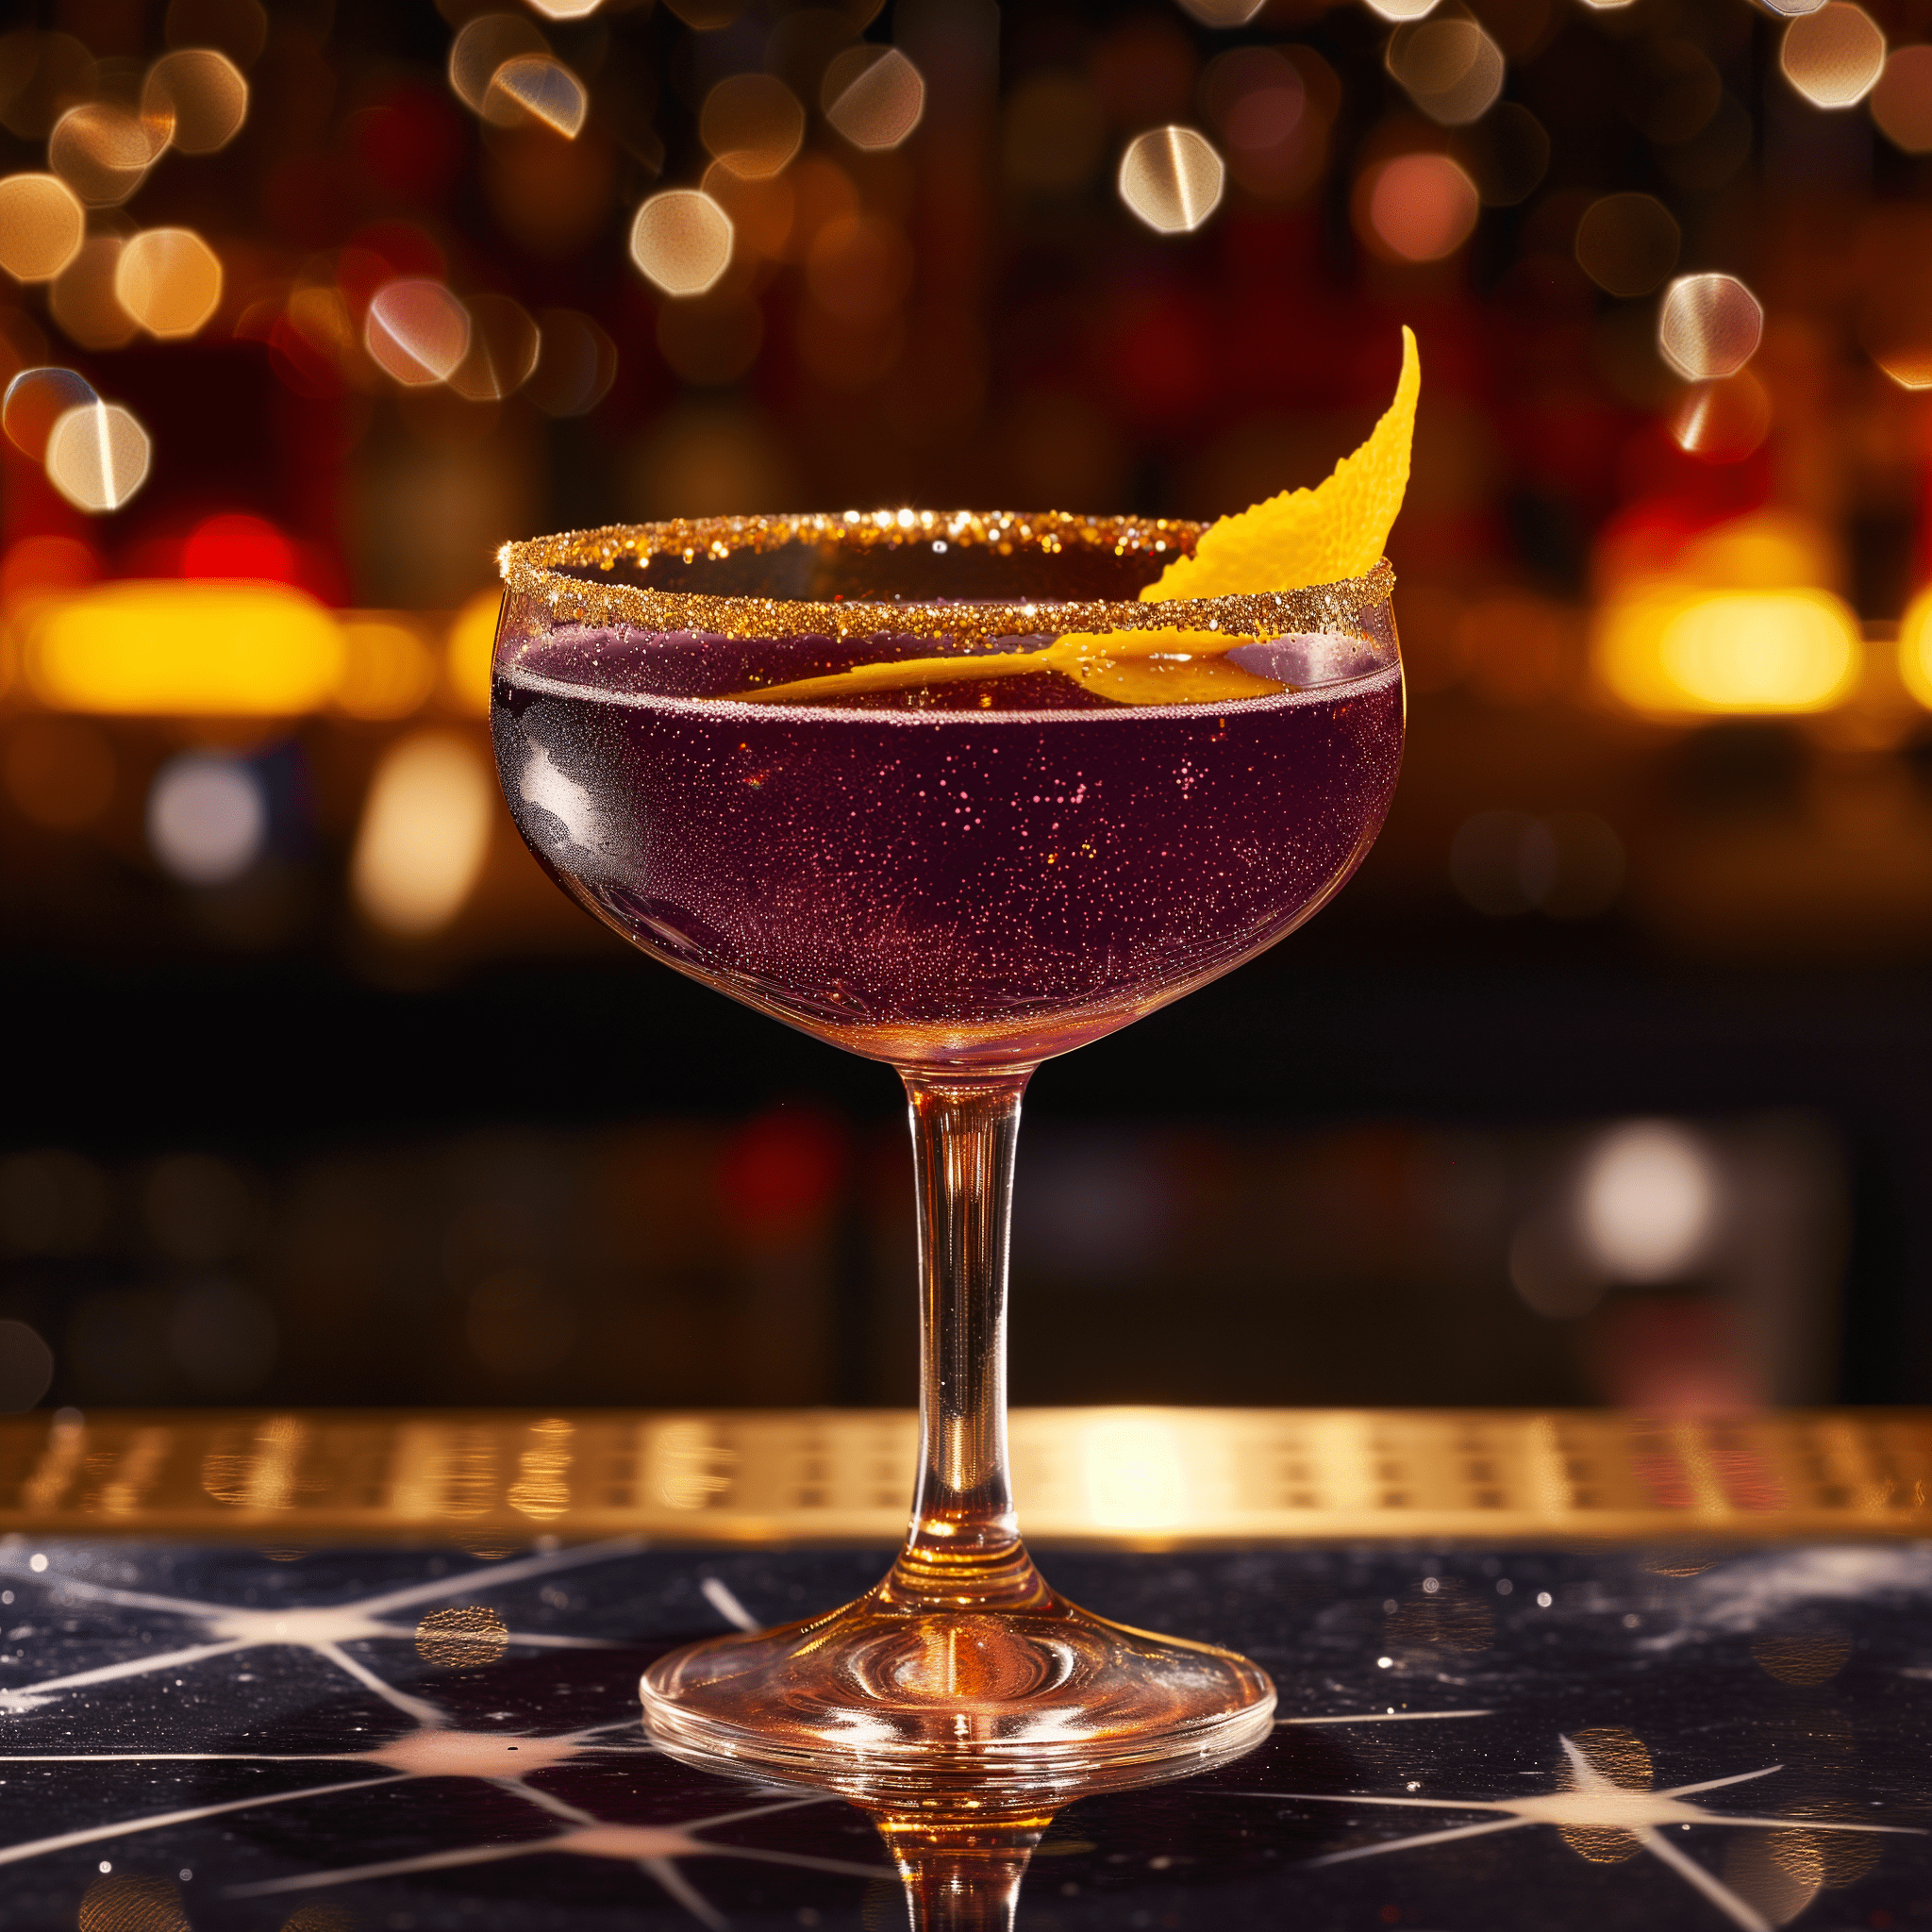 Stardust Cocktail Recipe - The Stardust cocktail offers a harmonious blend of sweet and tart, with the crème de cassis providing a deep berry sweetness that's perfectly balanced by the citrusy bitterness of the Earl Grey tea. The Champagne adds a crisp, bubbly finish that elevates the drink, making it light and refreshing.